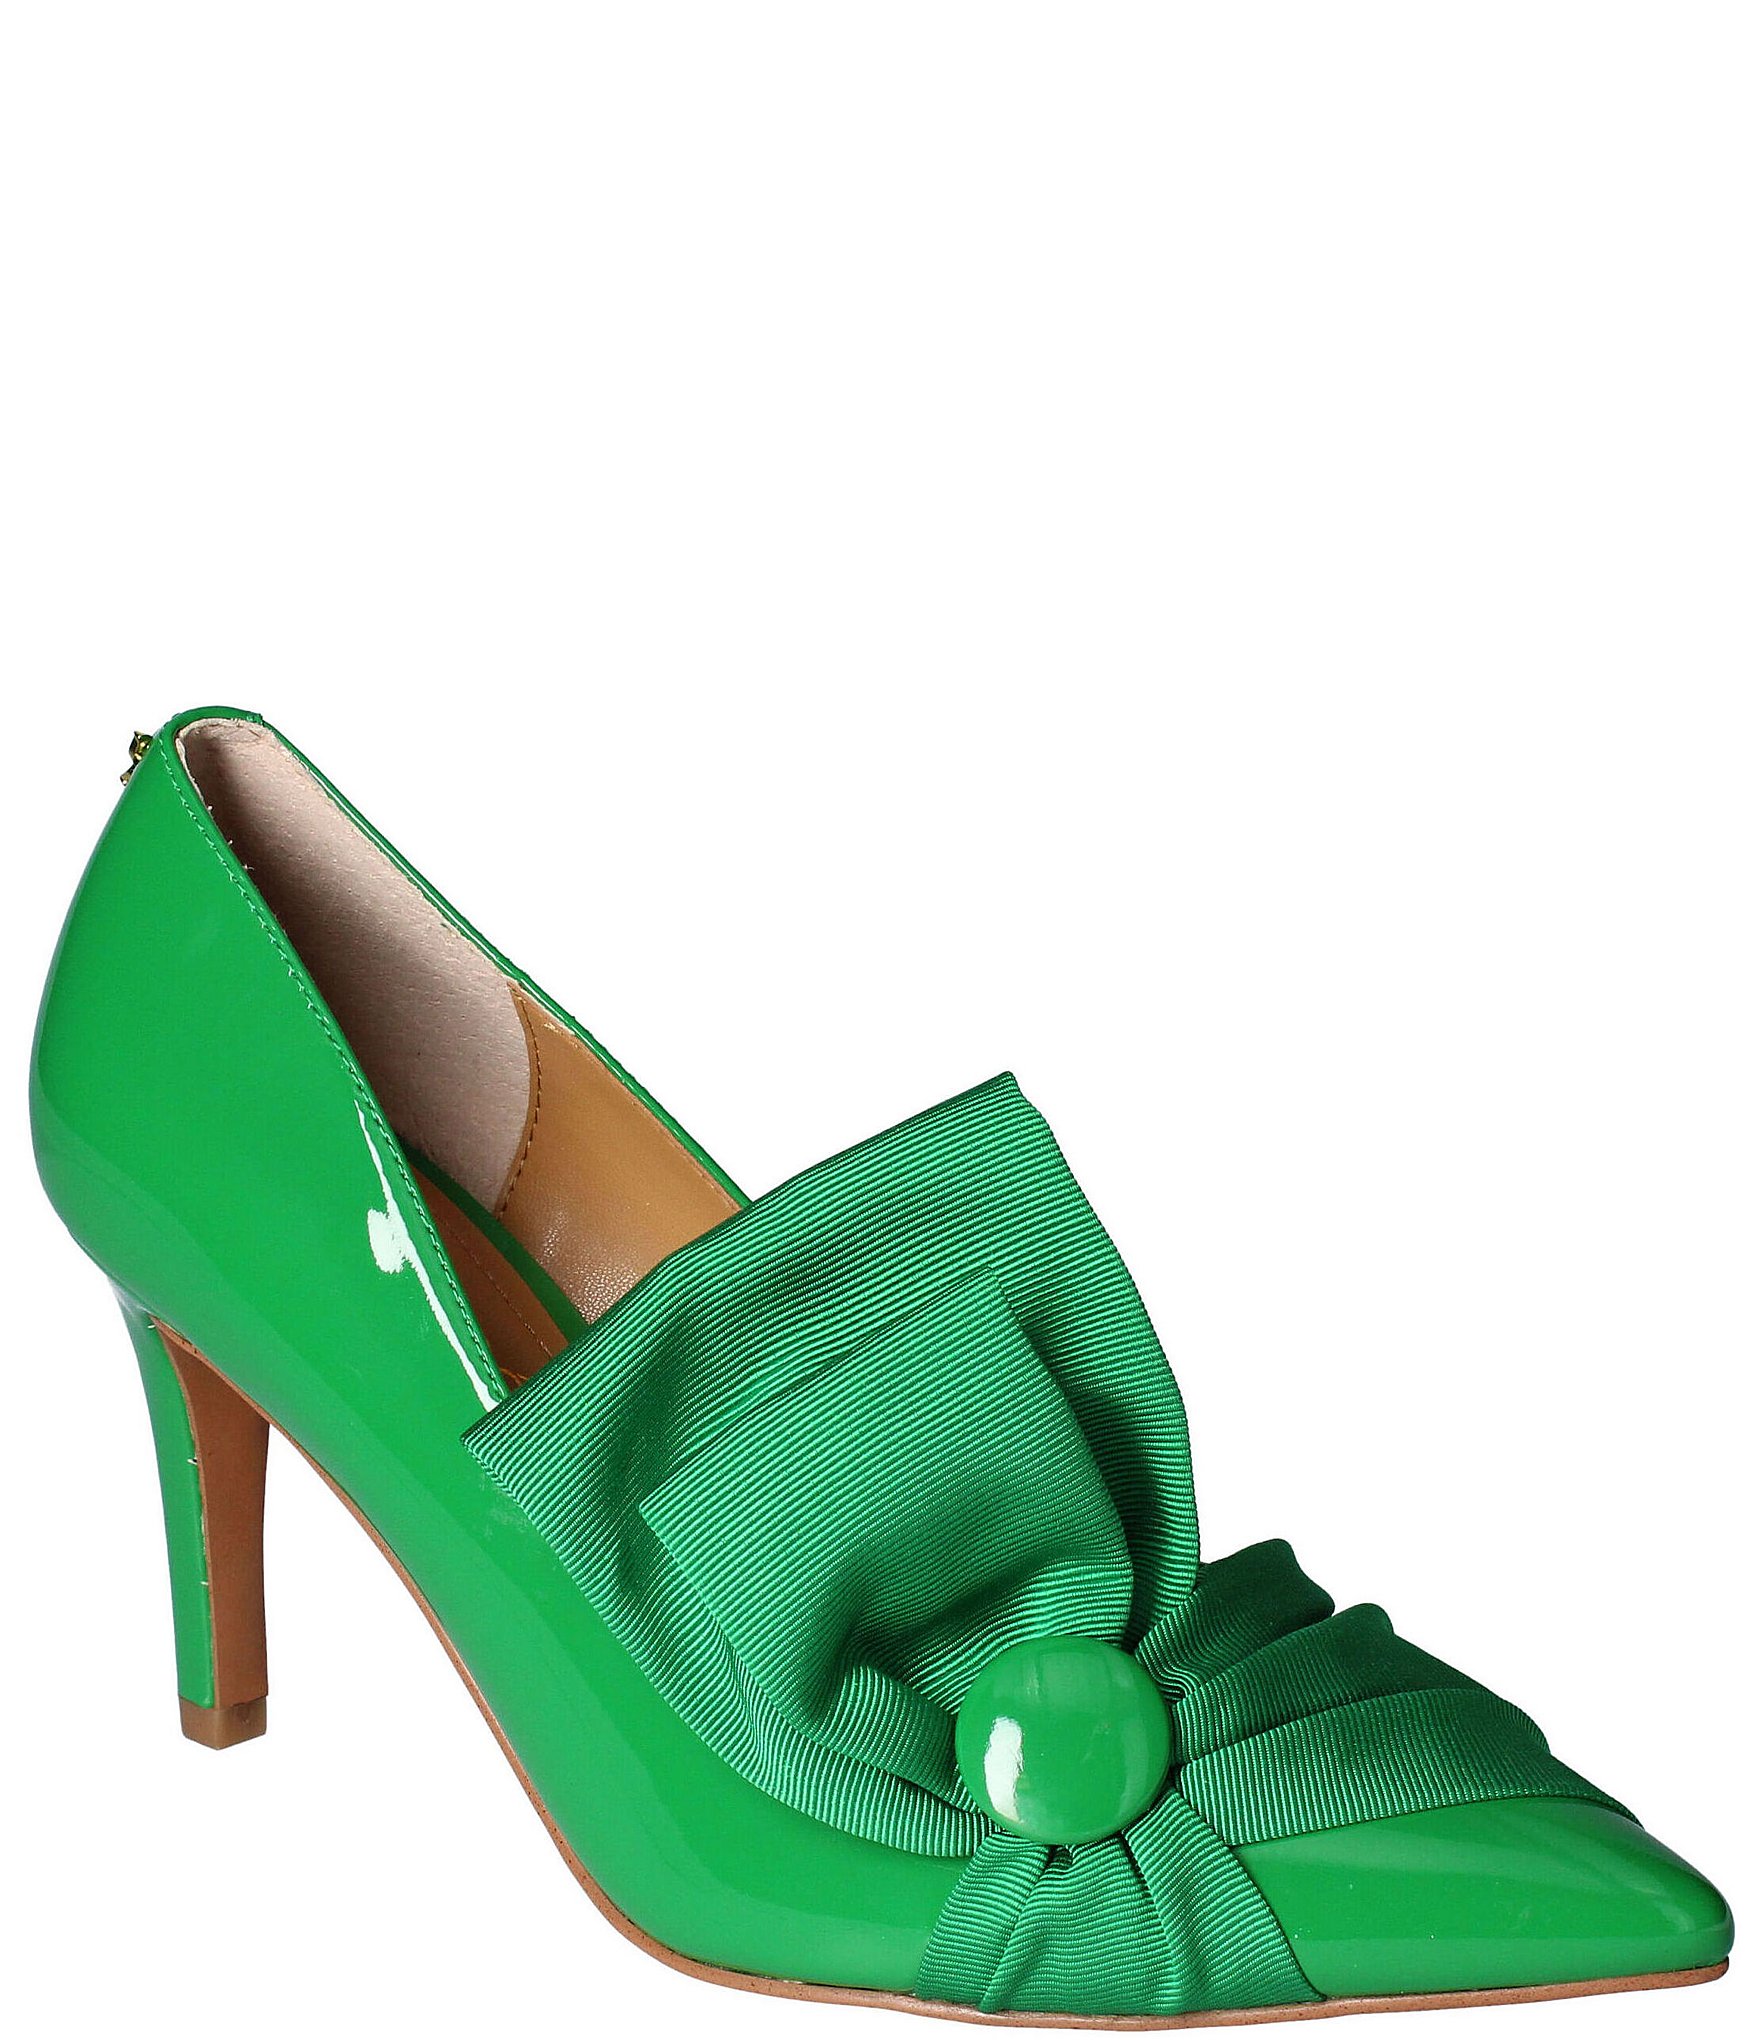 Croc skin boss lady office shoes | Buy green high heel court shoes